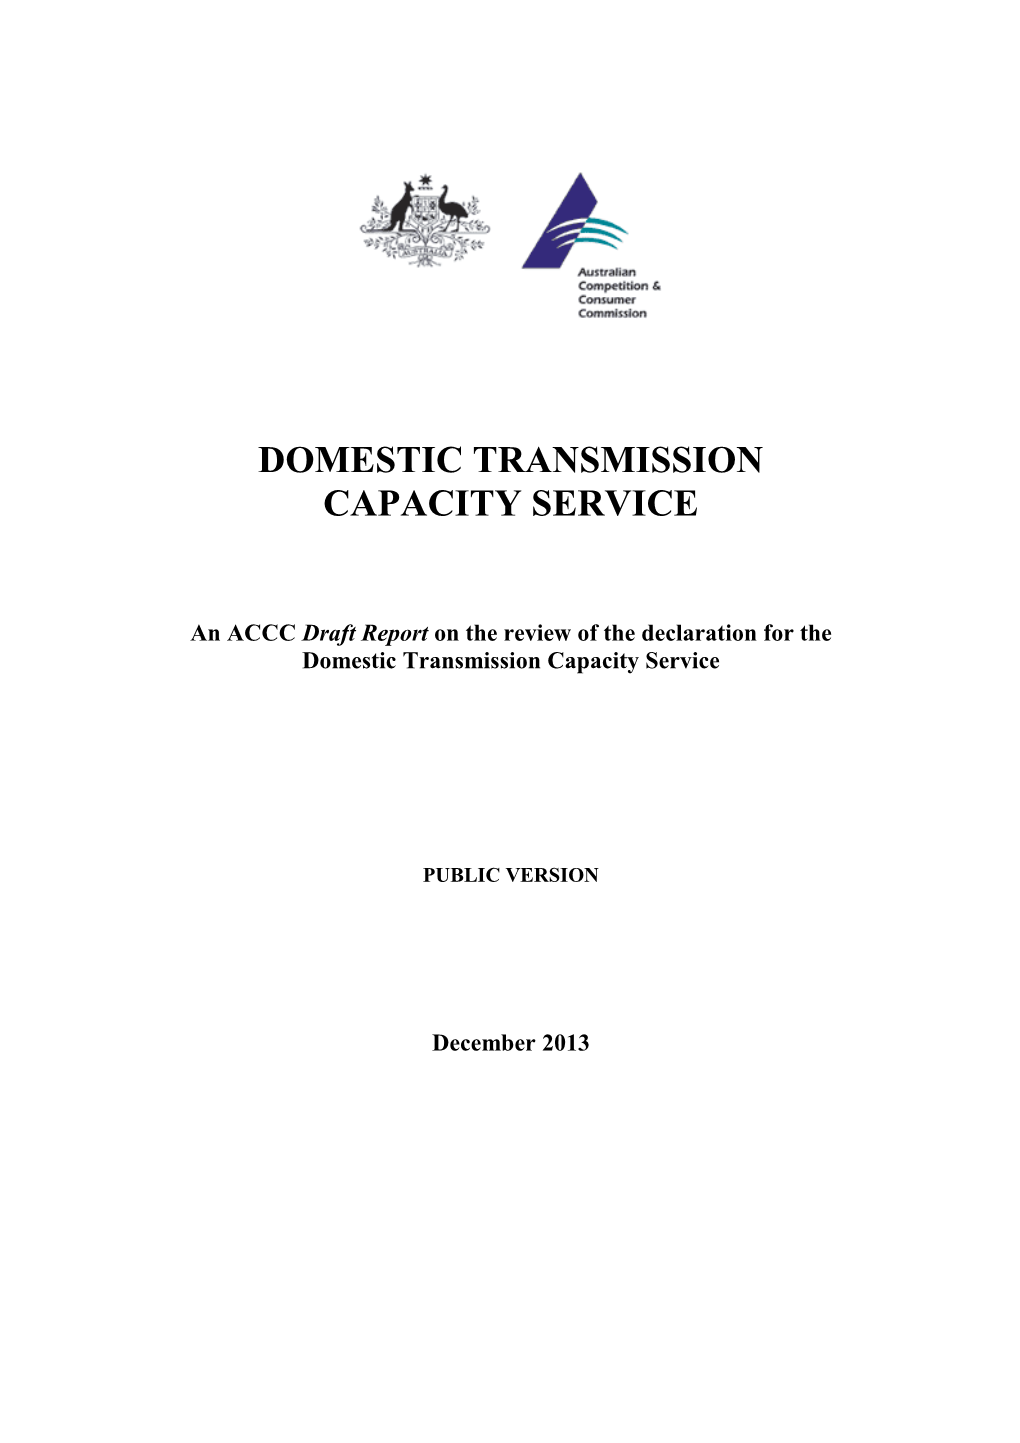 DOMESTIC TRANSMISSION CAPACITY SERVICE - an ACCC Draft Report on the Review of the Declaration